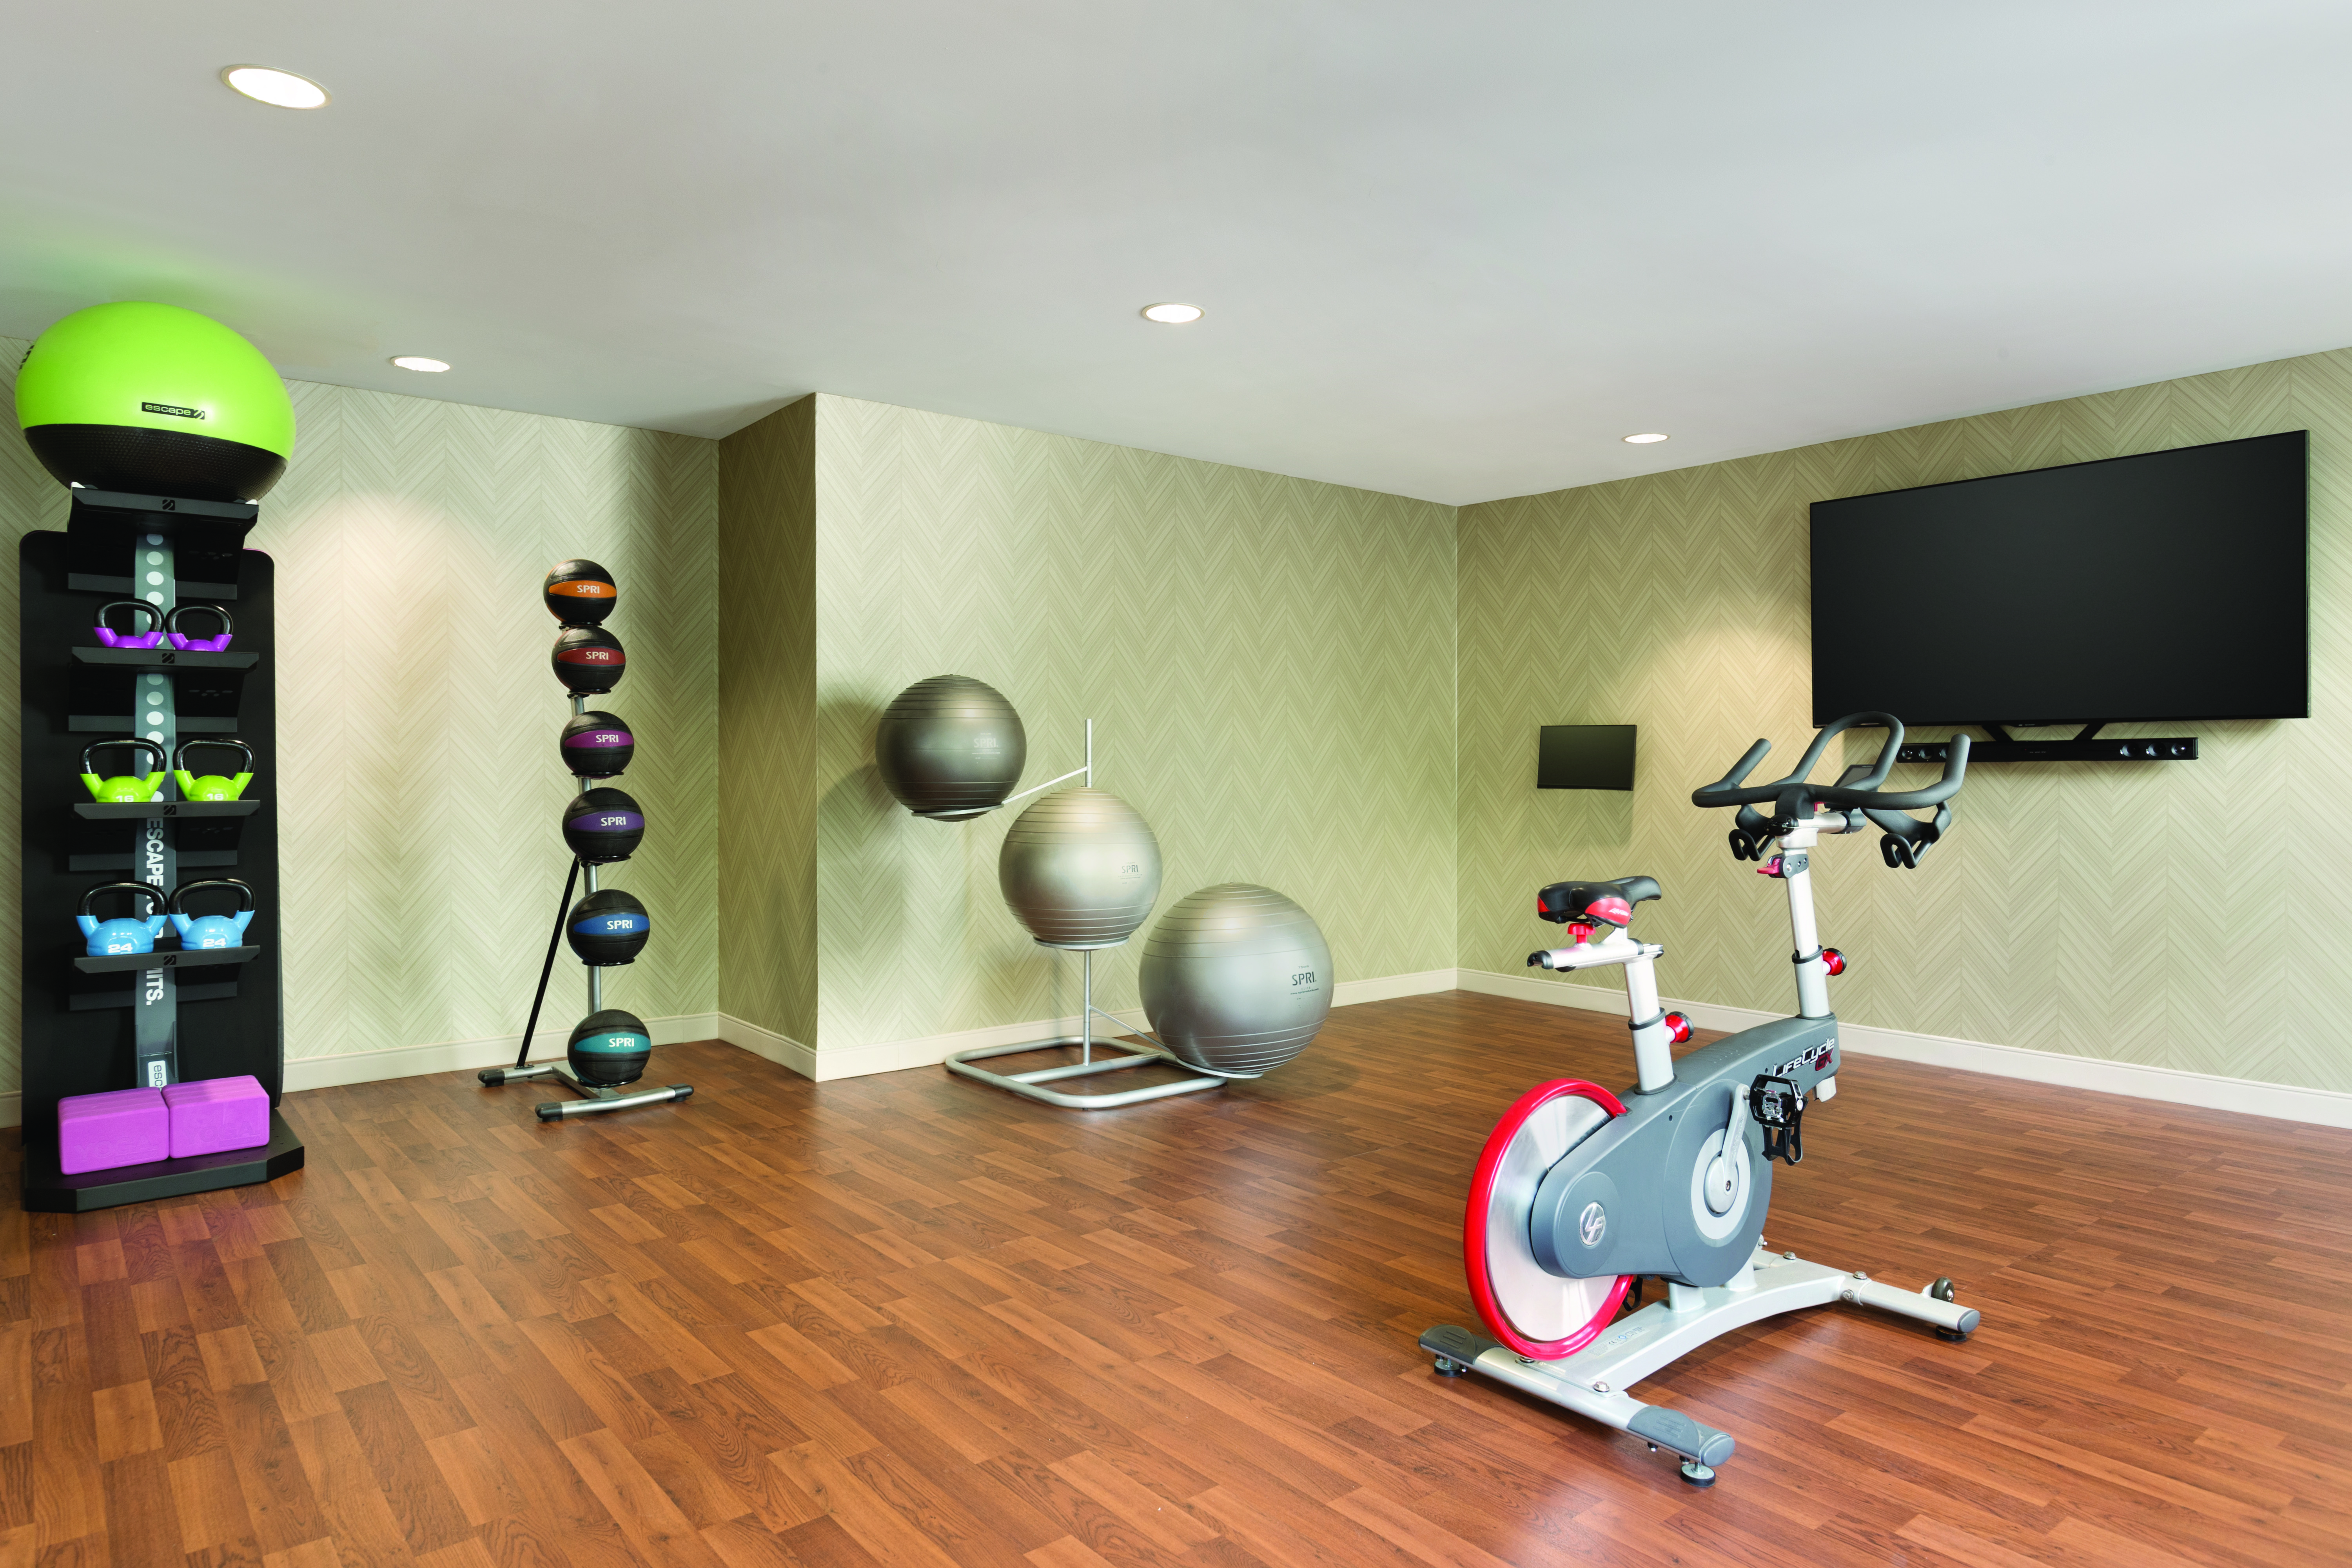 Wellbeats Room in the Fitness Center with Exercise Bike, Exercise Balls, Mats and TV 